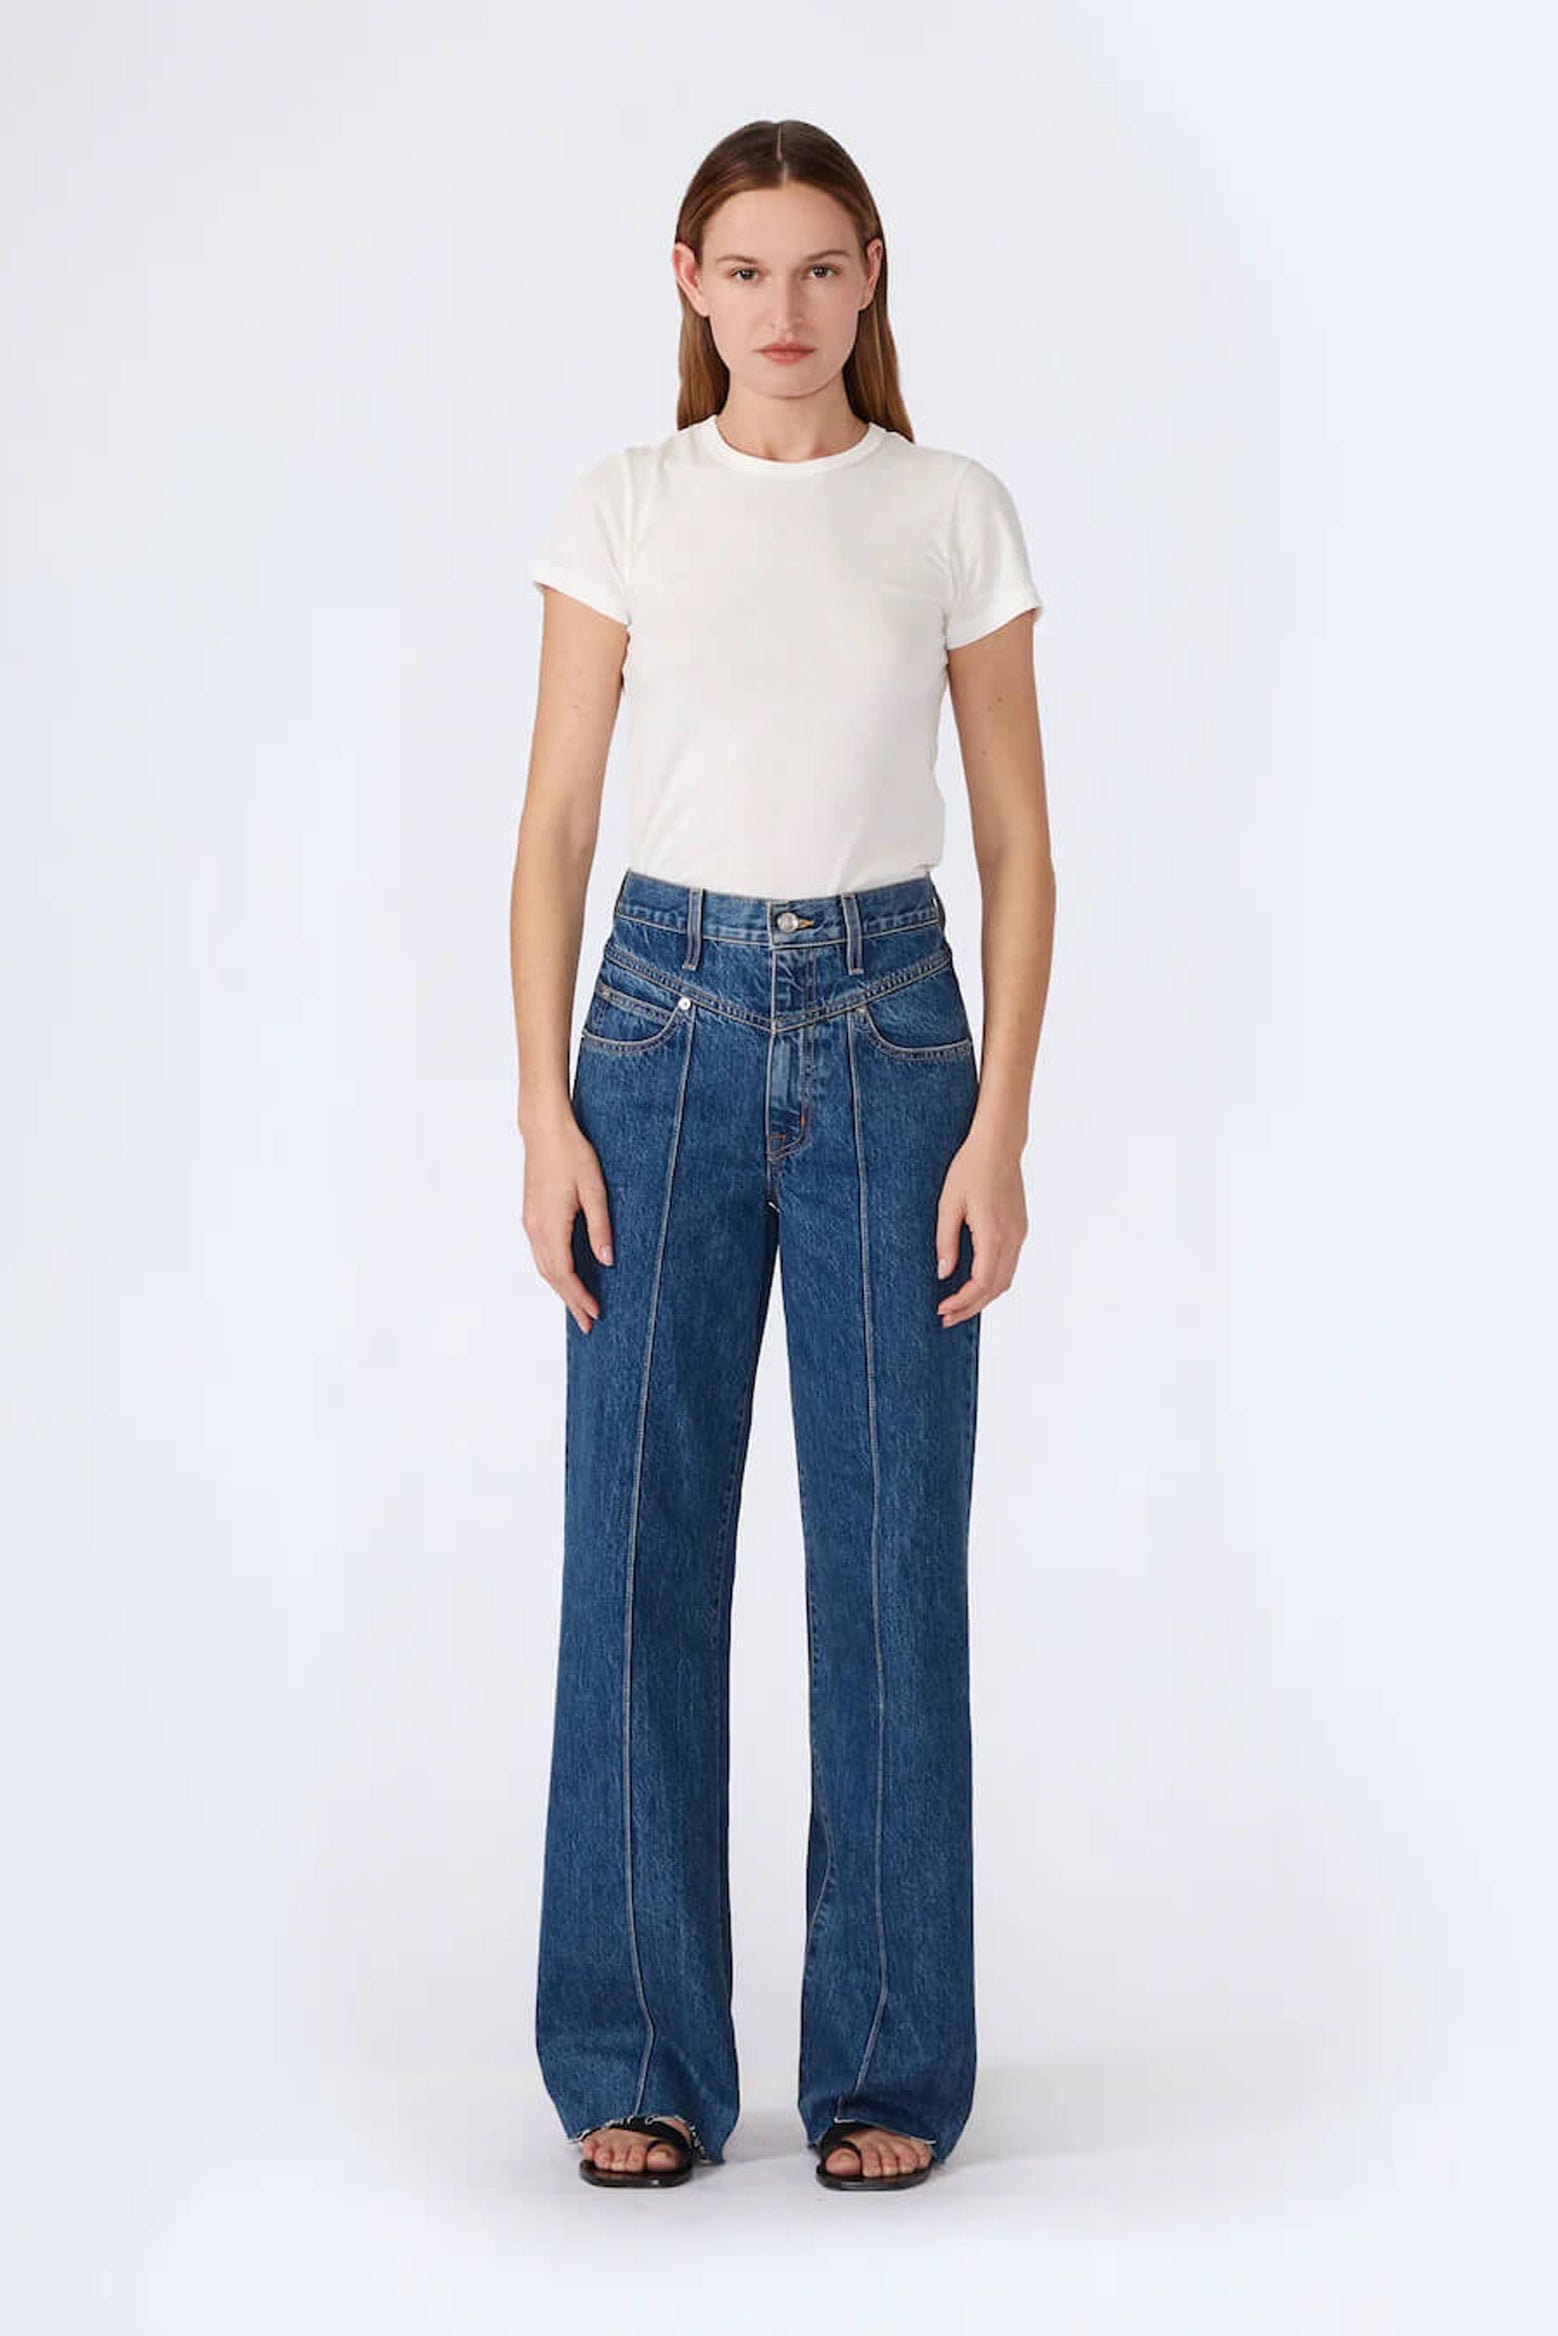 SLVRLAKE Grace Double Yoke Pintuck Jean in Start Me Up available at TNT The New Trend Australia. Free shipping on orders over $300 AUD.